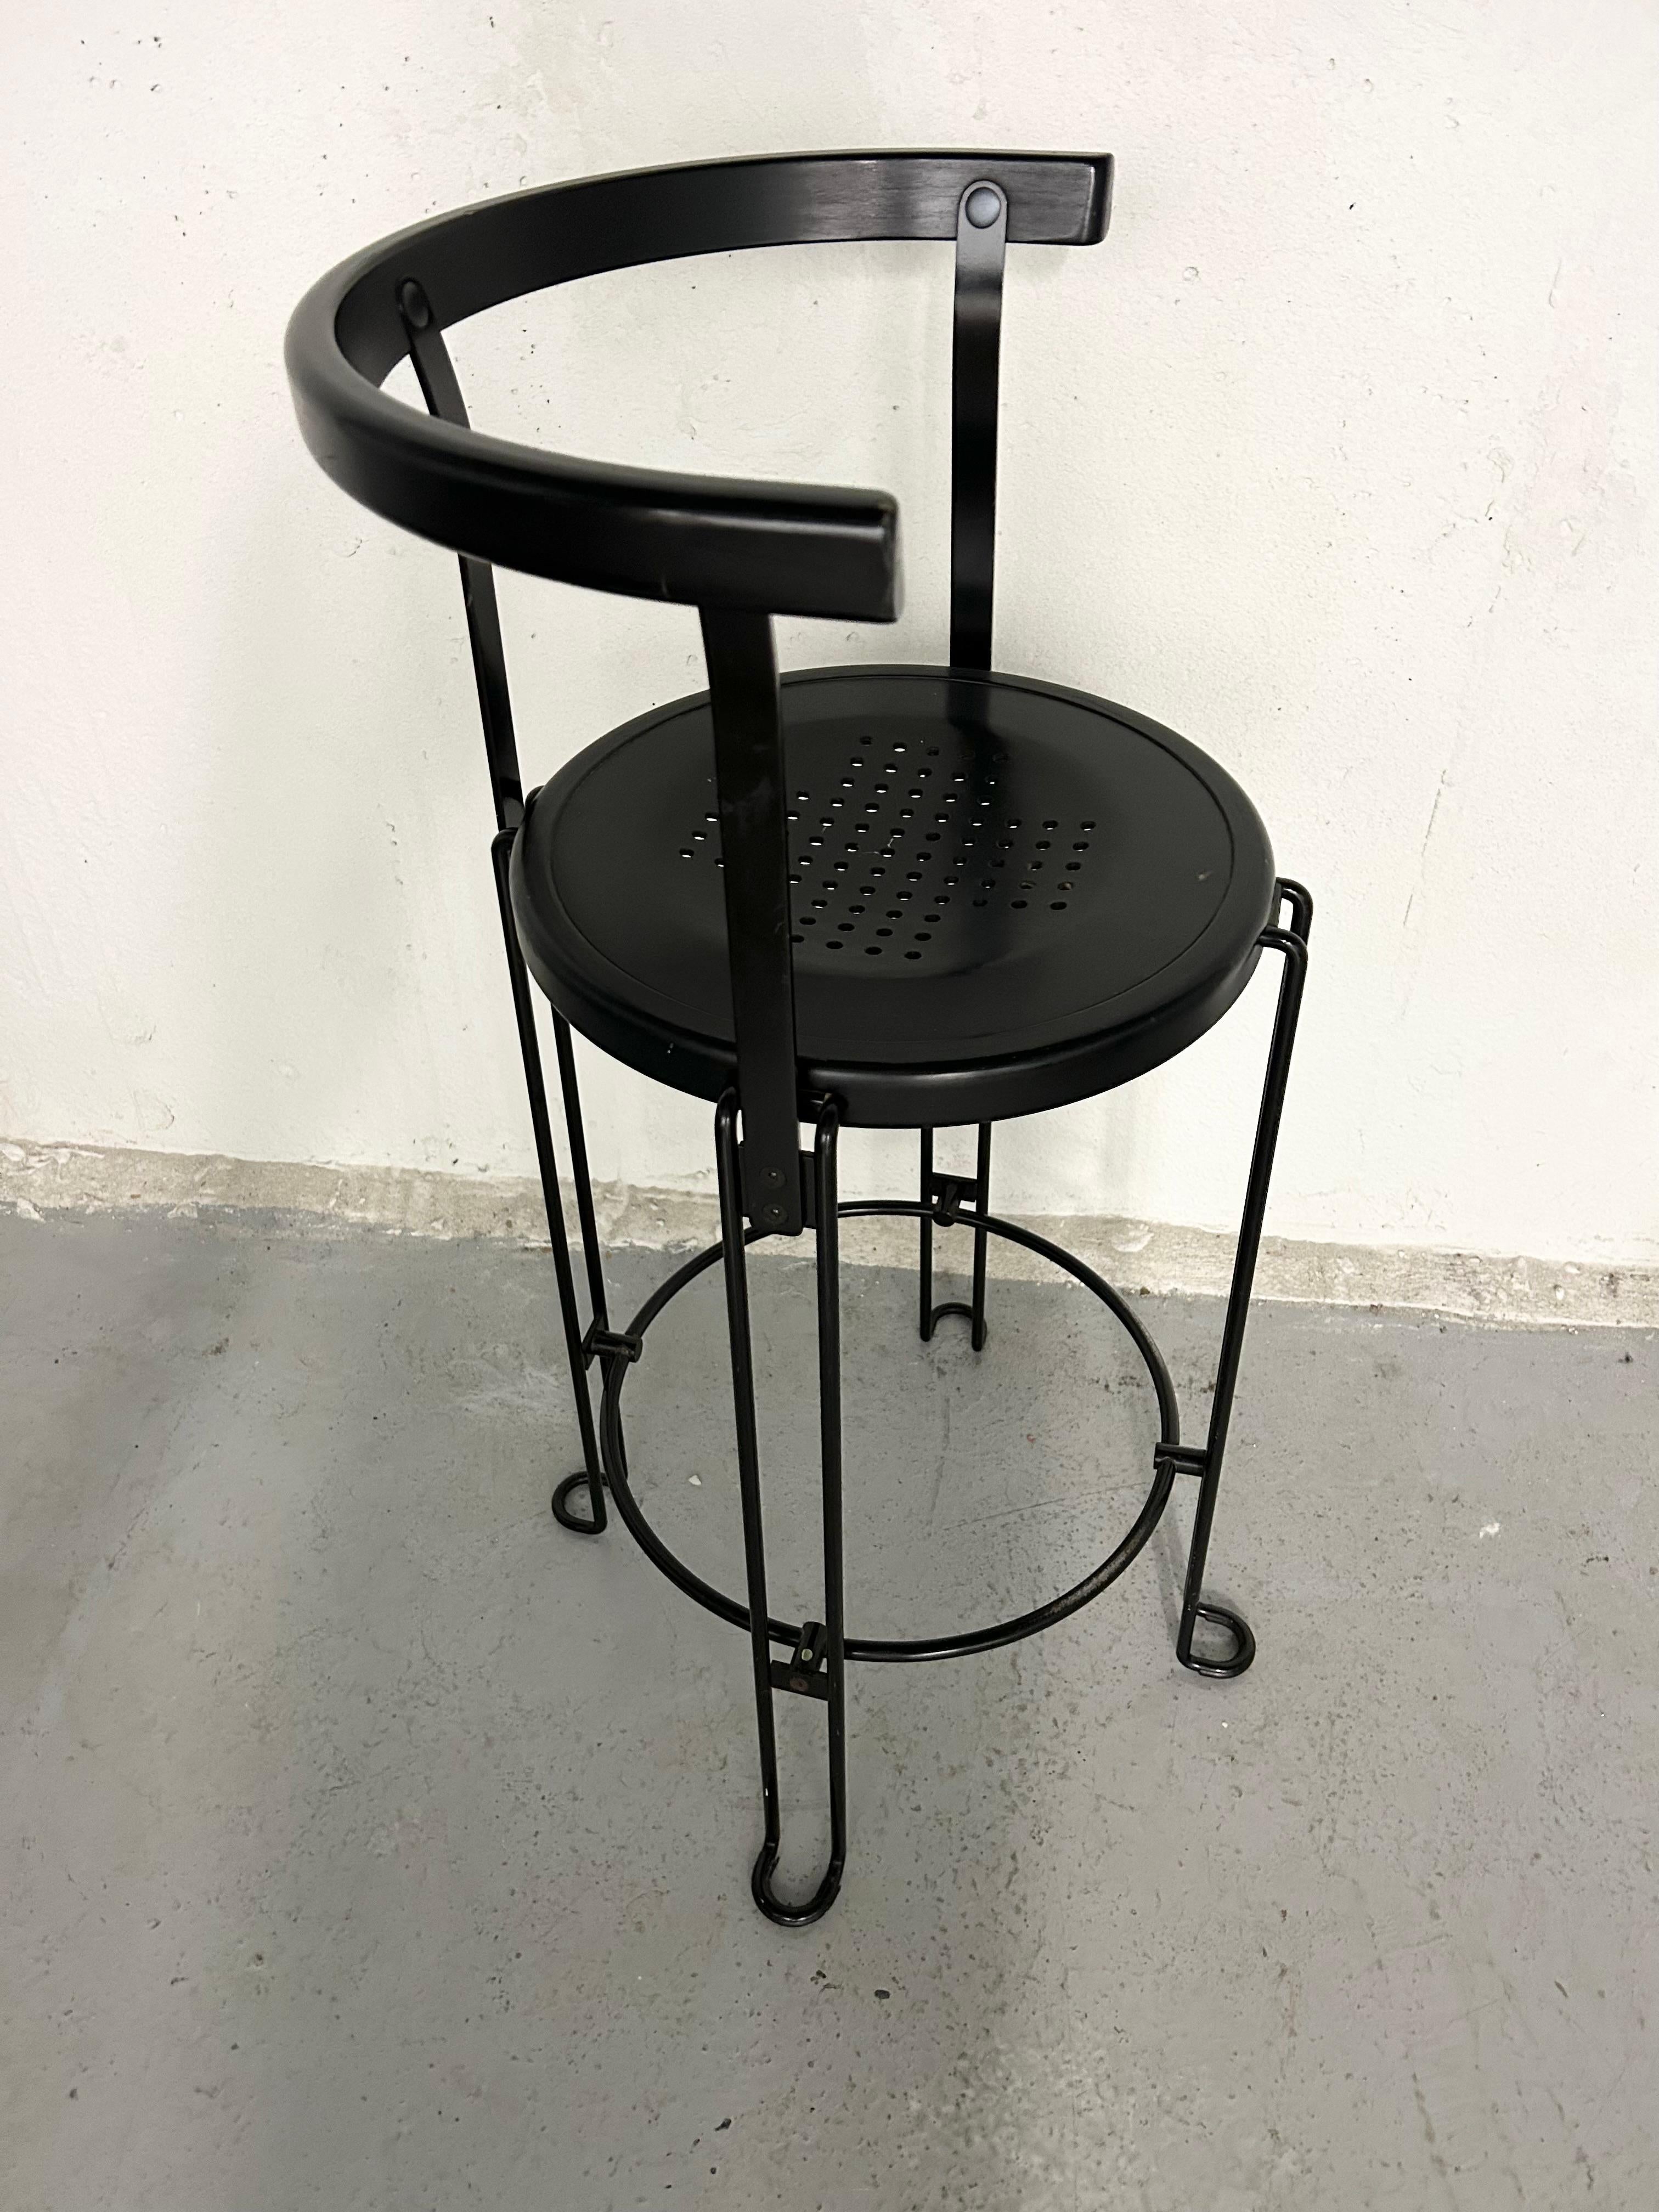 Borge Lindau for Bla Station Sweden, 1986 B4-65 Counter Height Stool 1